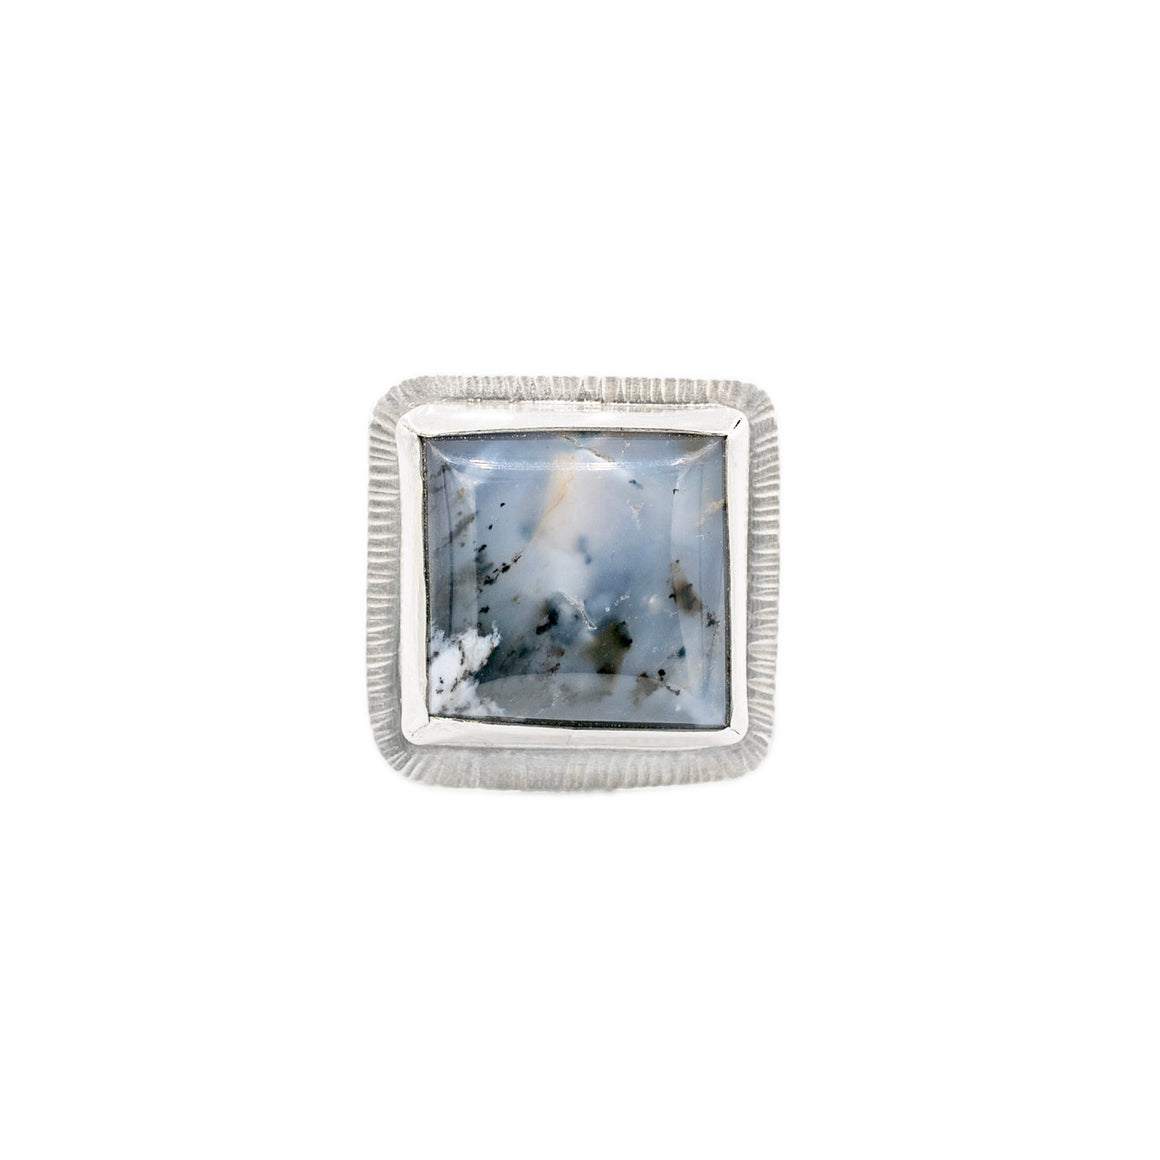 Dendritic Agate Fine Silver woven Adjustable Ring by Margaret at Original Sin Jewelry 